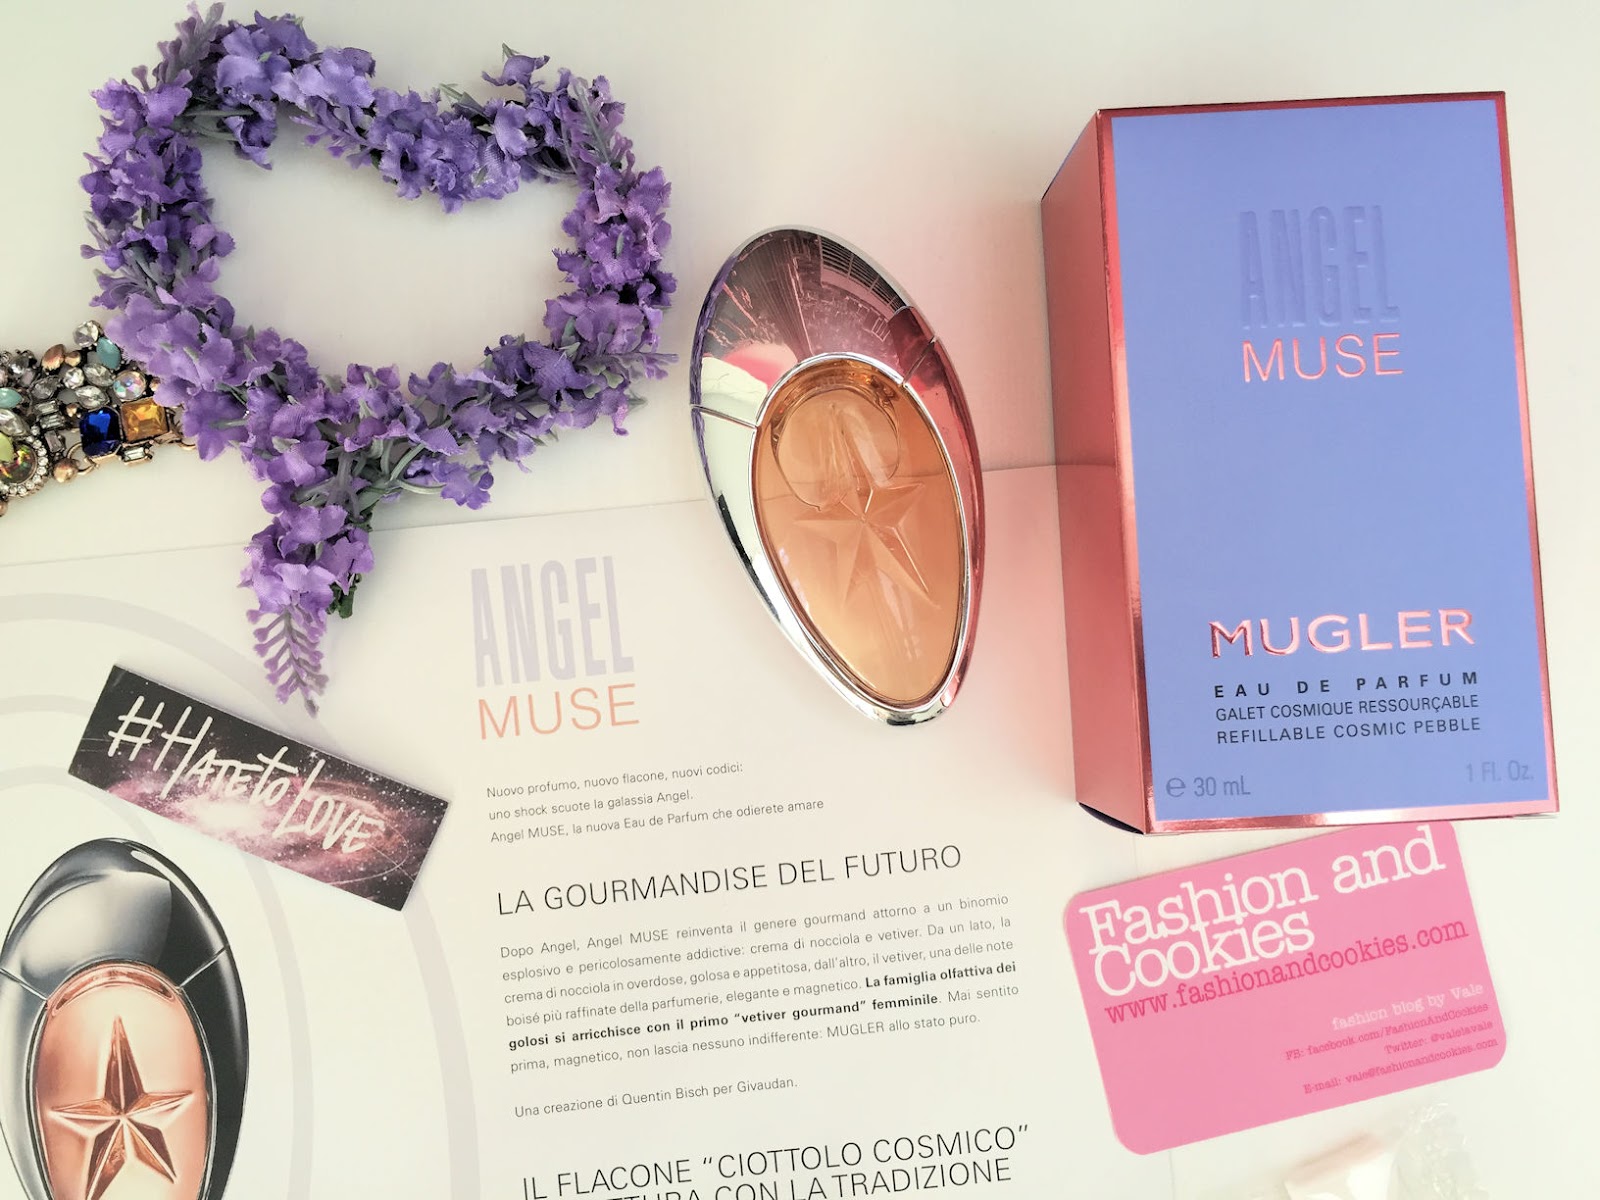 Angel Muse Eau de Parfum by Thierry Mugler on Fashion and Cookies fashion and beauty blog, beauty blogger